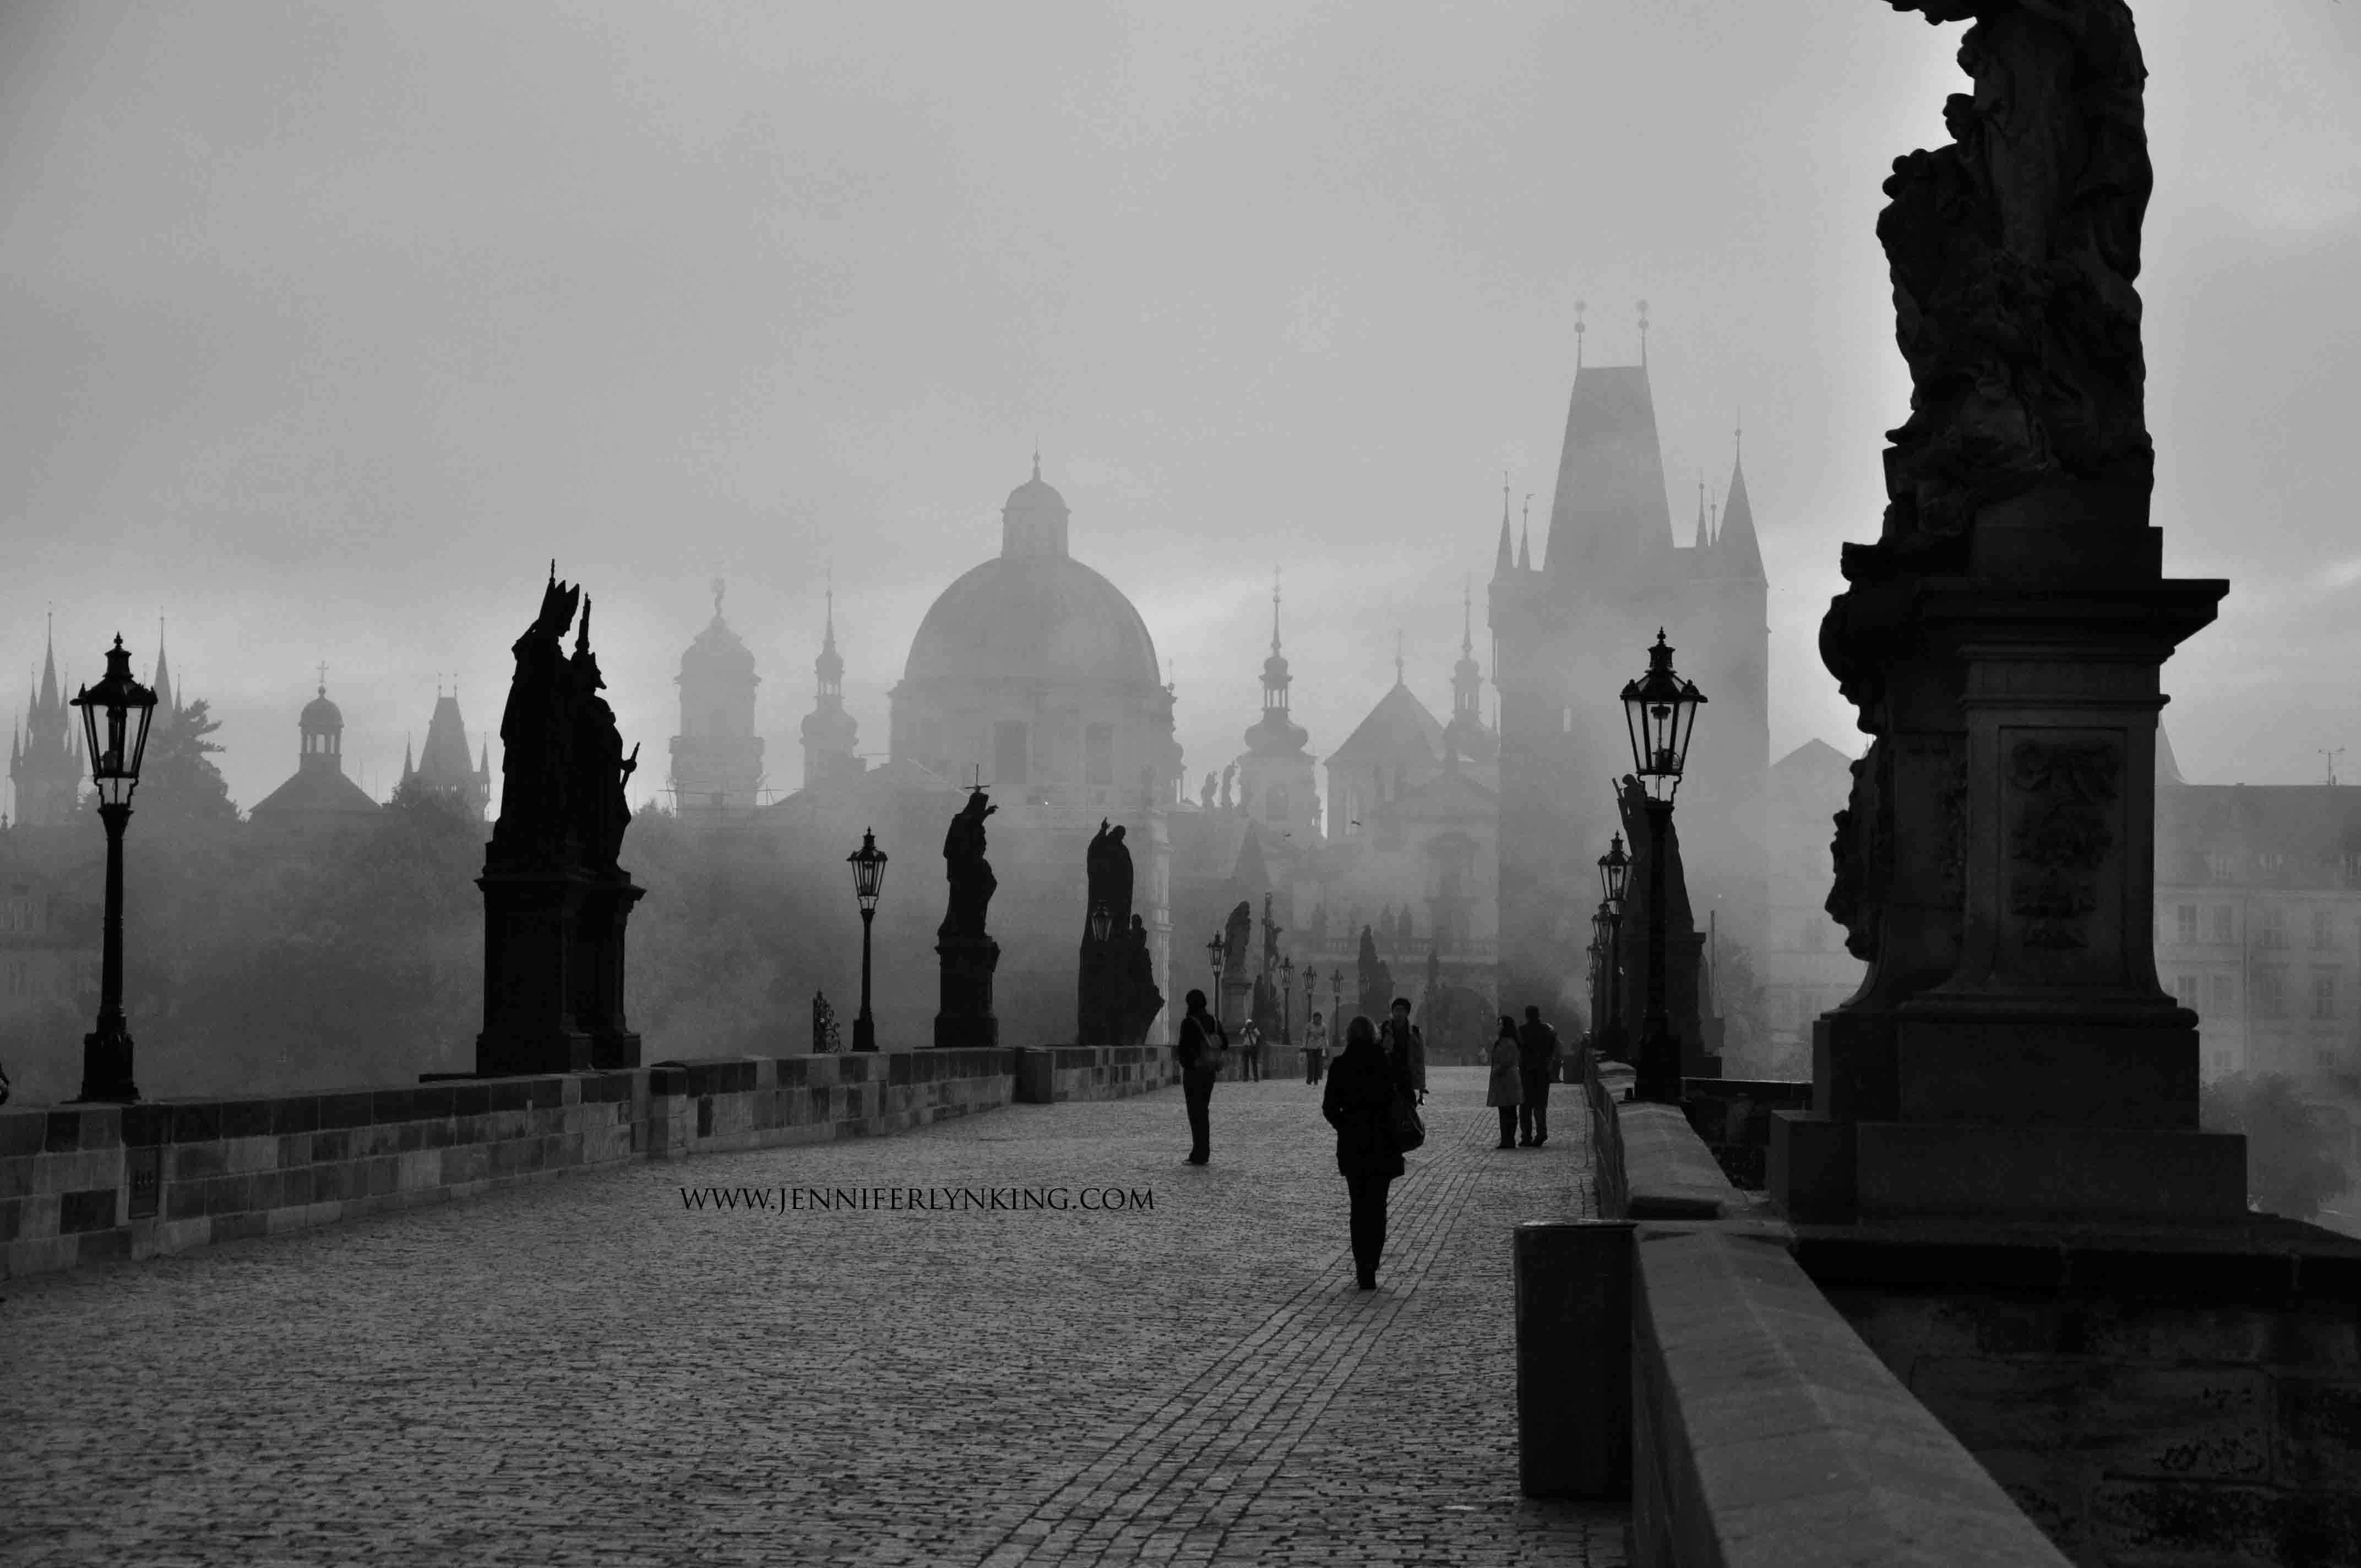 Charles IV is best known today for the Charles Bridge that unites Prague across the Vltava River.